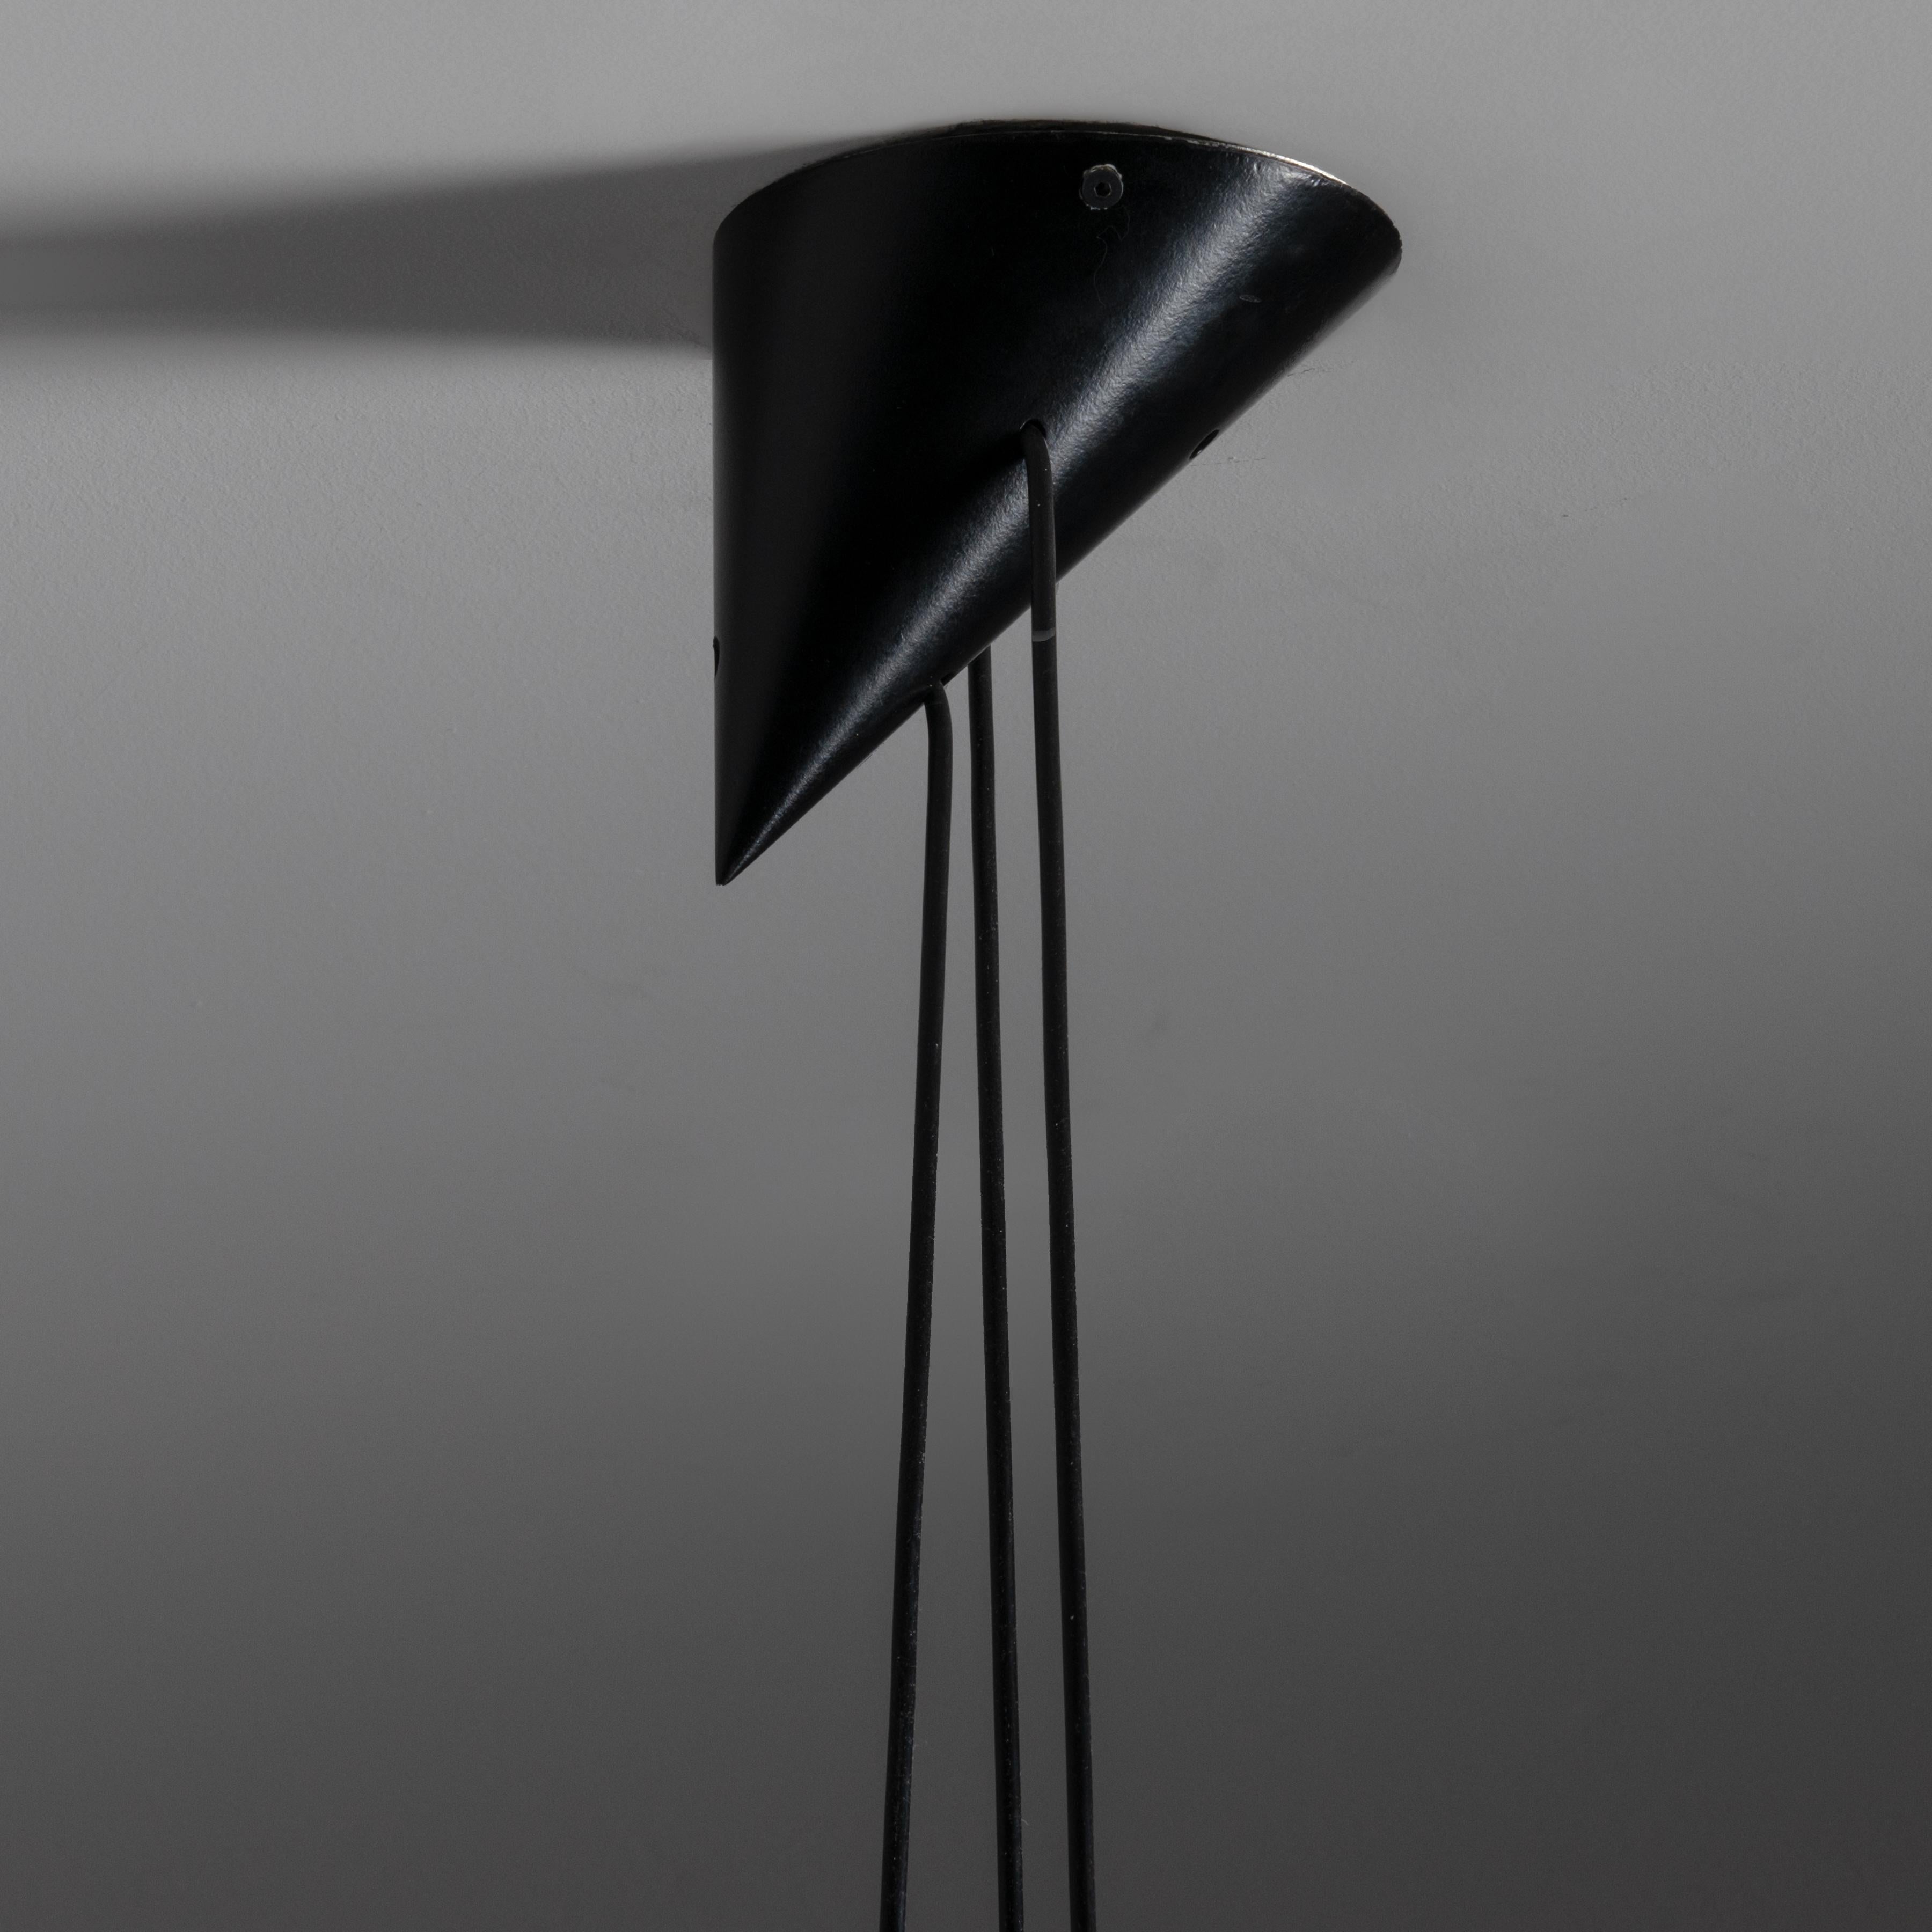 Model no. 16519 'Bille Lamp' by Bent Bille for Louis Poulsen. Designed and manufactured in Denmark, circa the 1950s. Black lacquered aluminum shade in a simple and elegant conical shape. The canopy features a close representation of the shade shape,